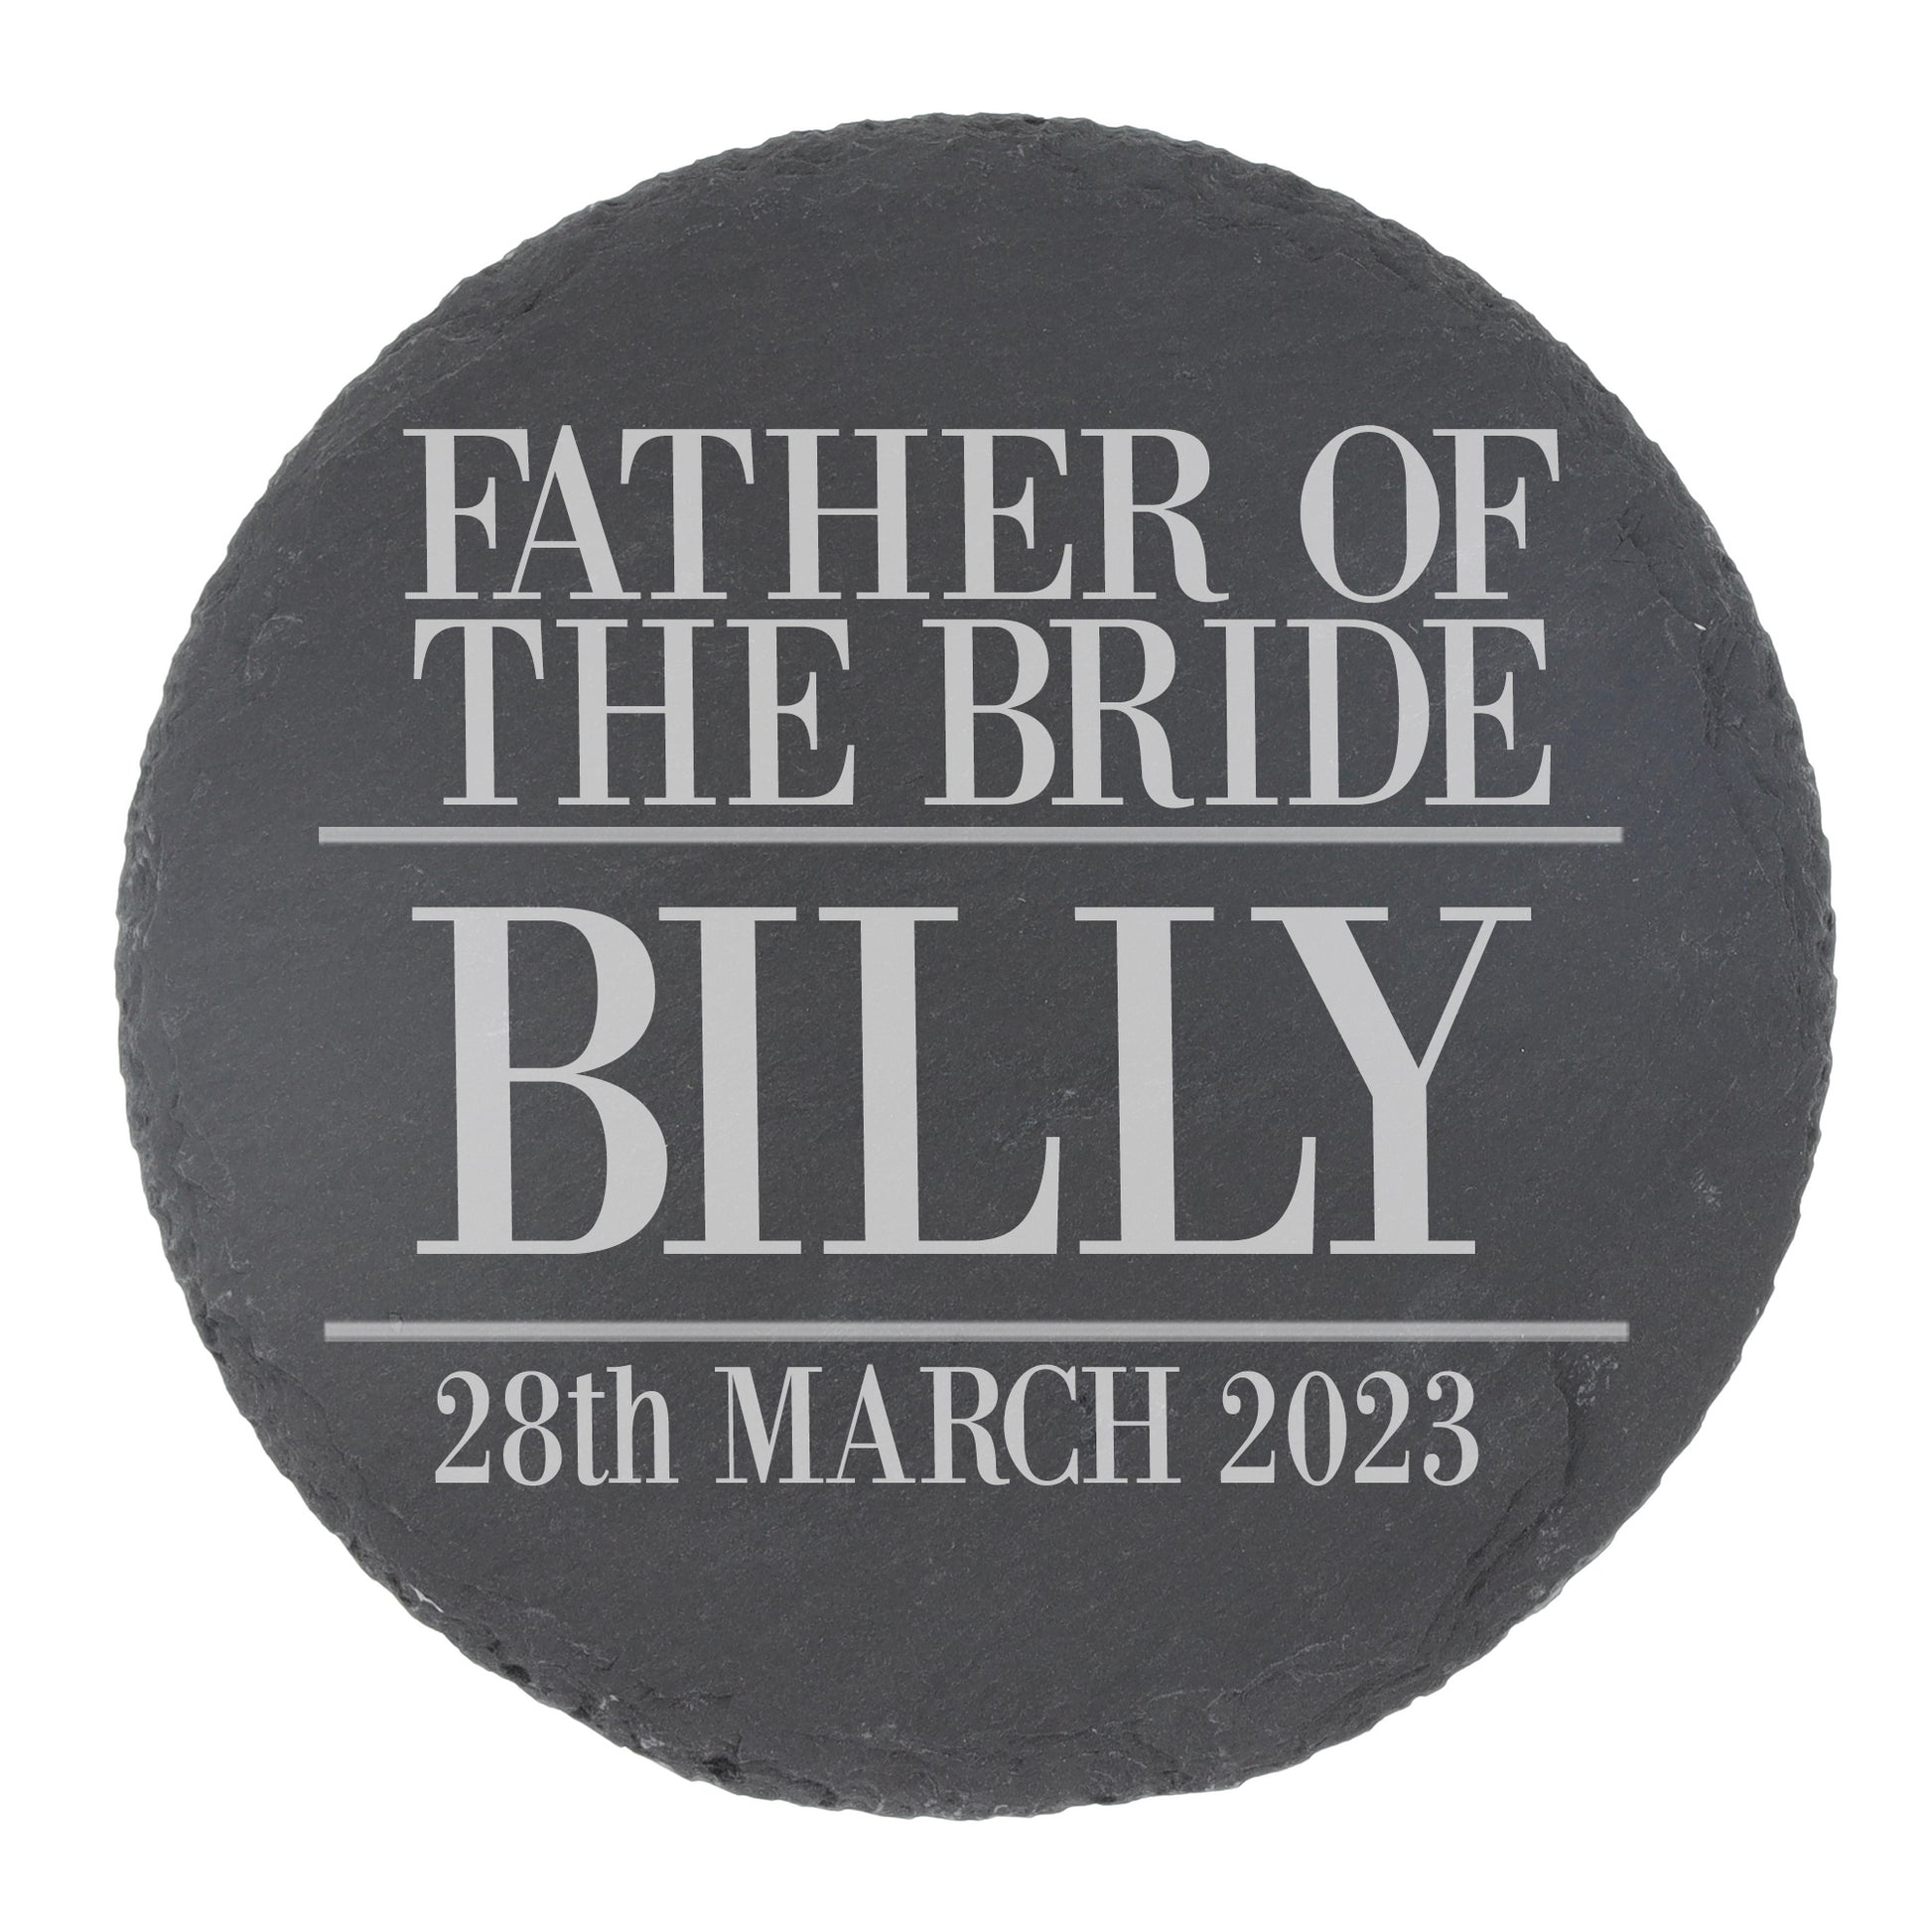 Personalised Father Of The Bride Whisky Glass and/or Coaster Set  - Always Looking Good - Round Coaster On Its Own  